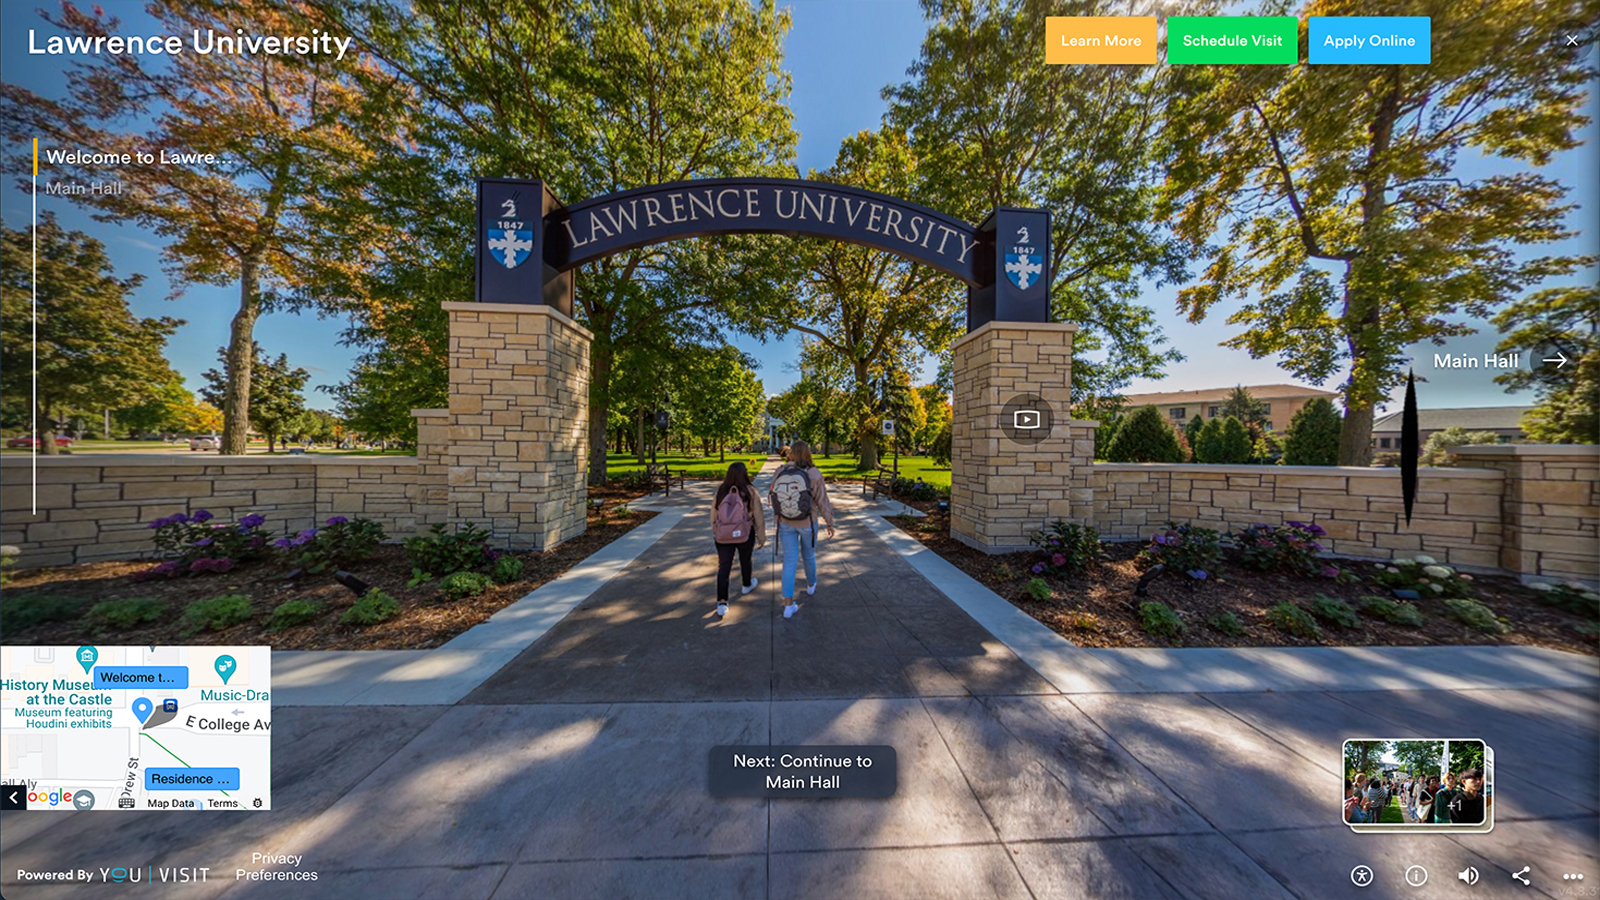 Launch a virtual campus tour of Lawrence University